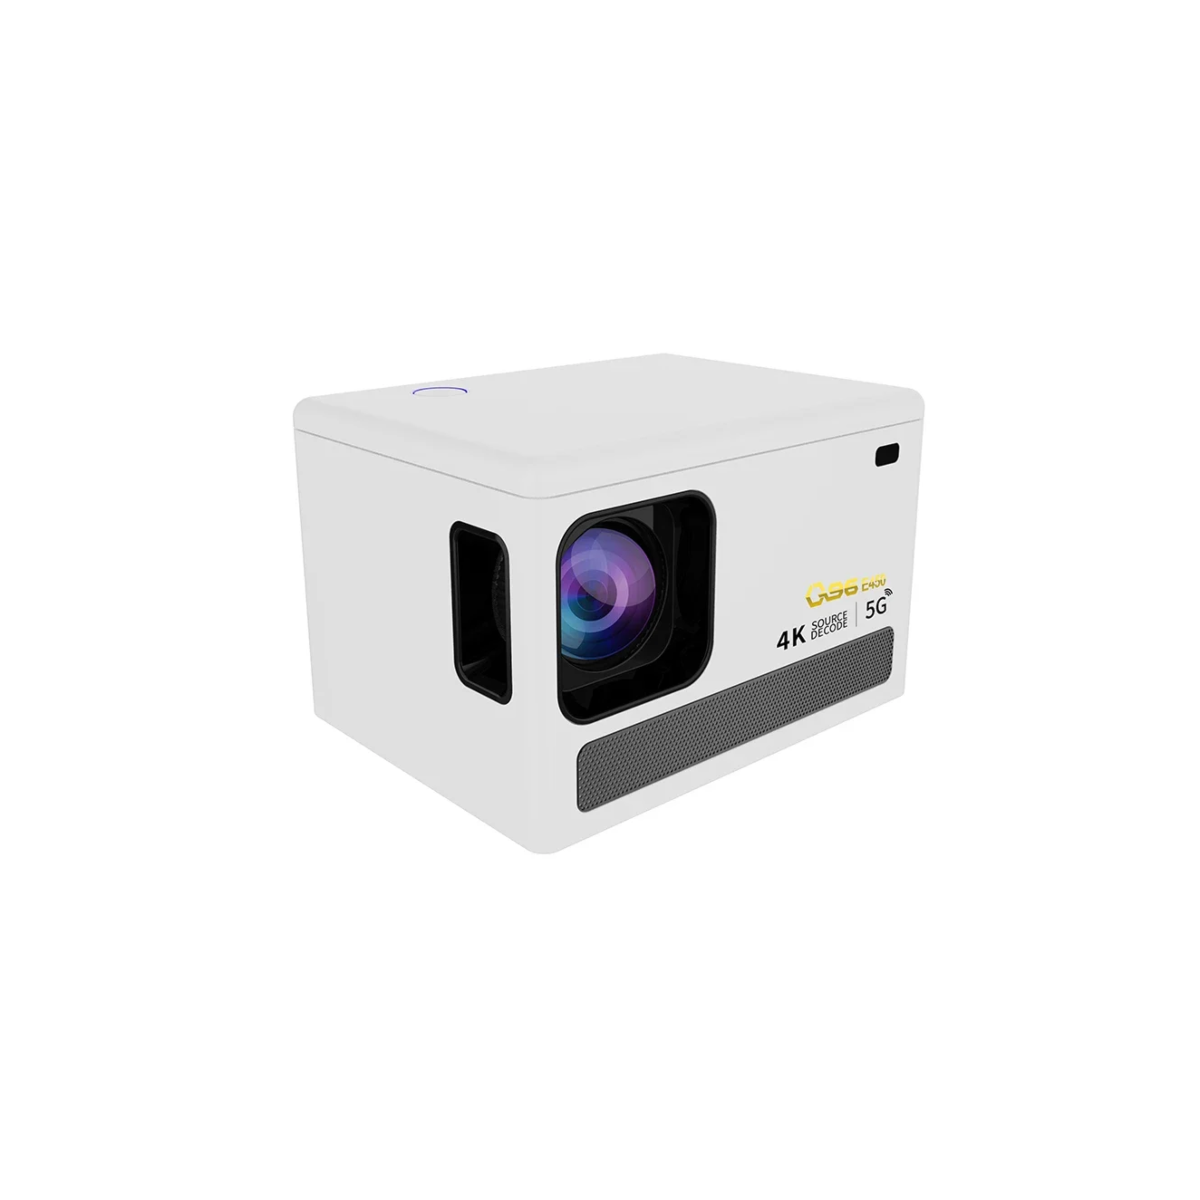 E450 Mini Projector 4K Android 9.0 Native 1080P 720P 500ANSI Portable BT5.0 Home Outdoor Cinema Projection Angle Adjustable - magcubicvision.com